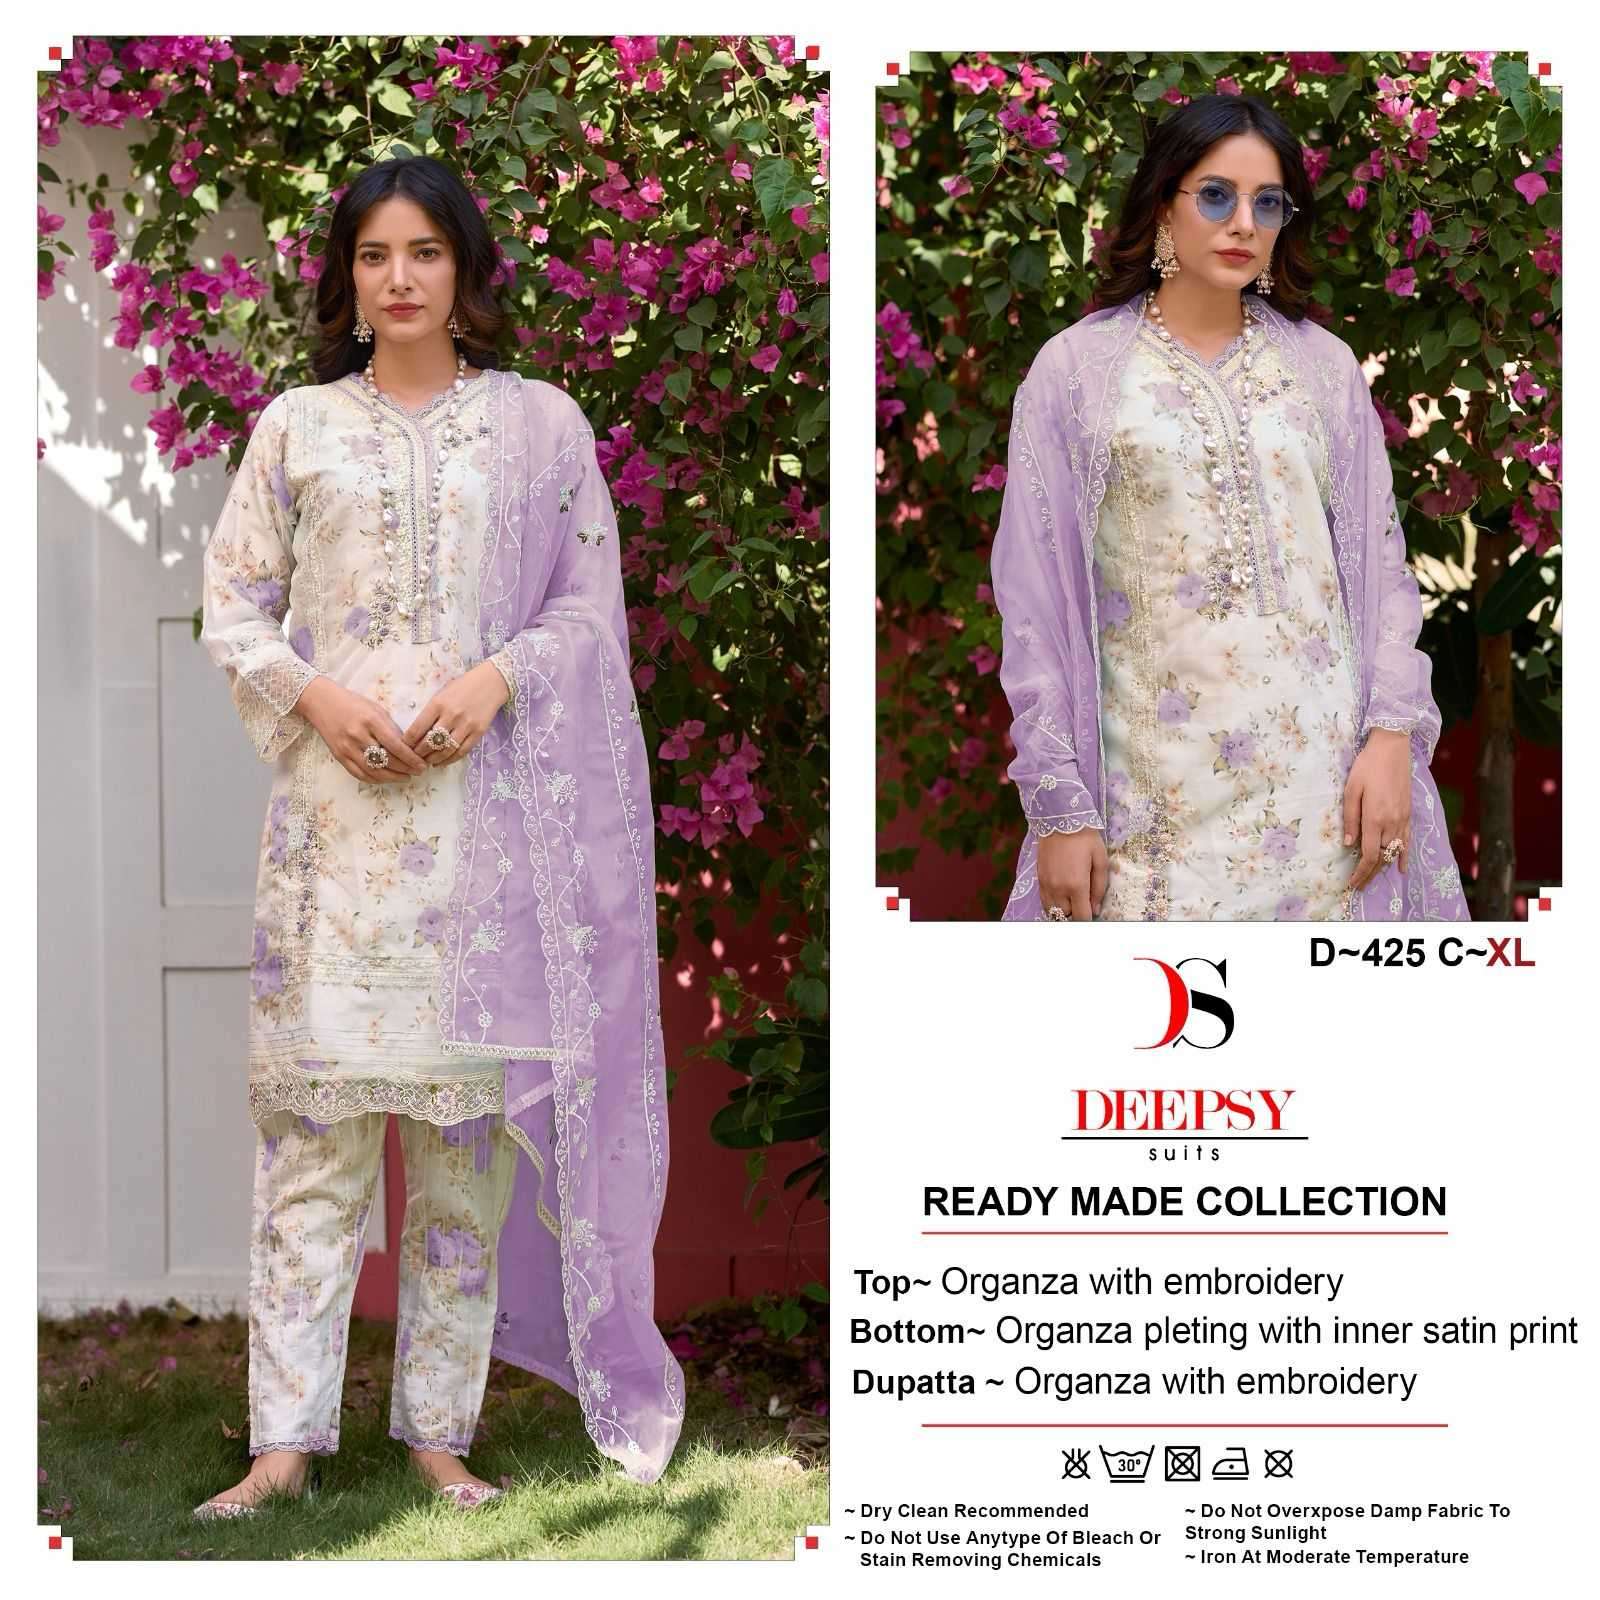 DEEPSY SERIES 425 DESIGNER WITH EMBROIDERY WORK READYMADE ORGANZA SUITS ARE AVAILABLE AT WHOLESALE PRICE